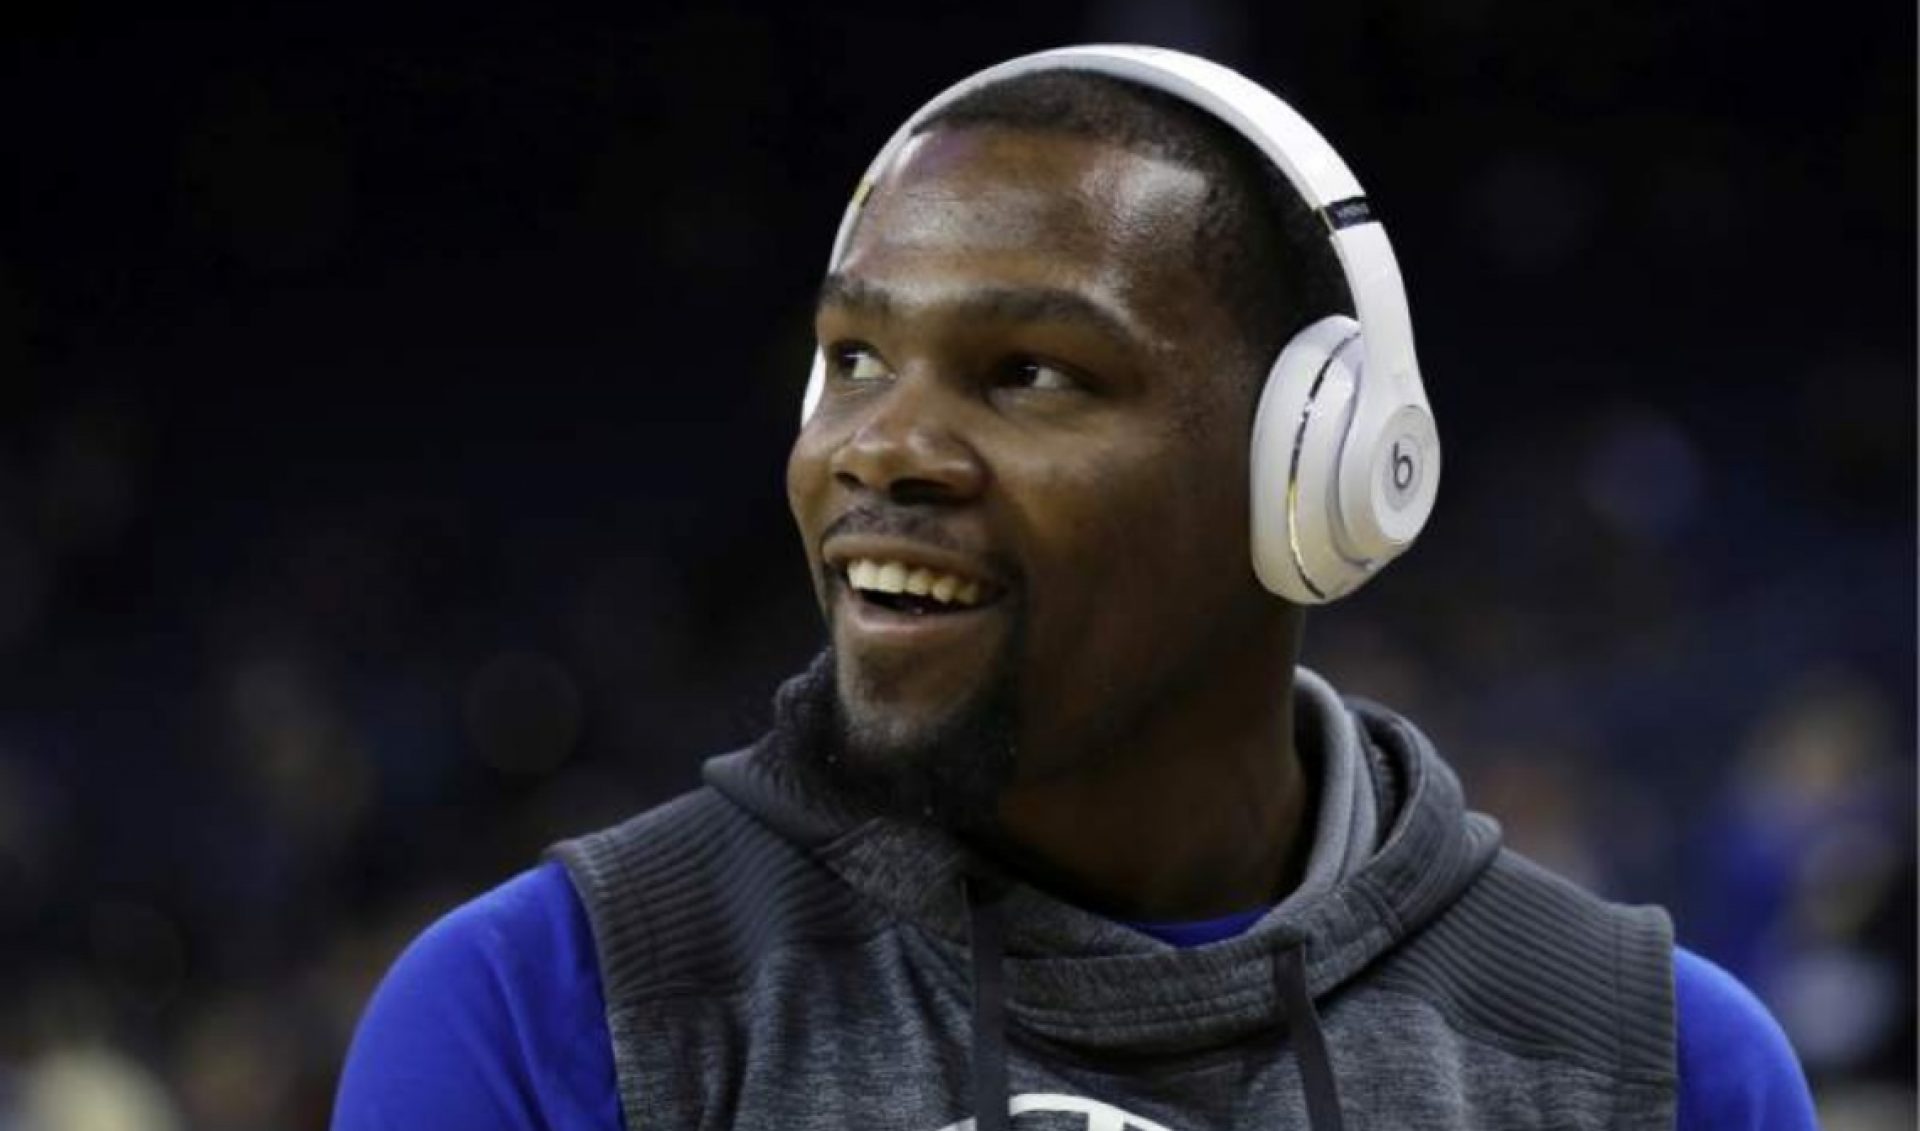 Kevin Durant’s Media Company Will Help Athletes Launch Their Own YouTube Channels